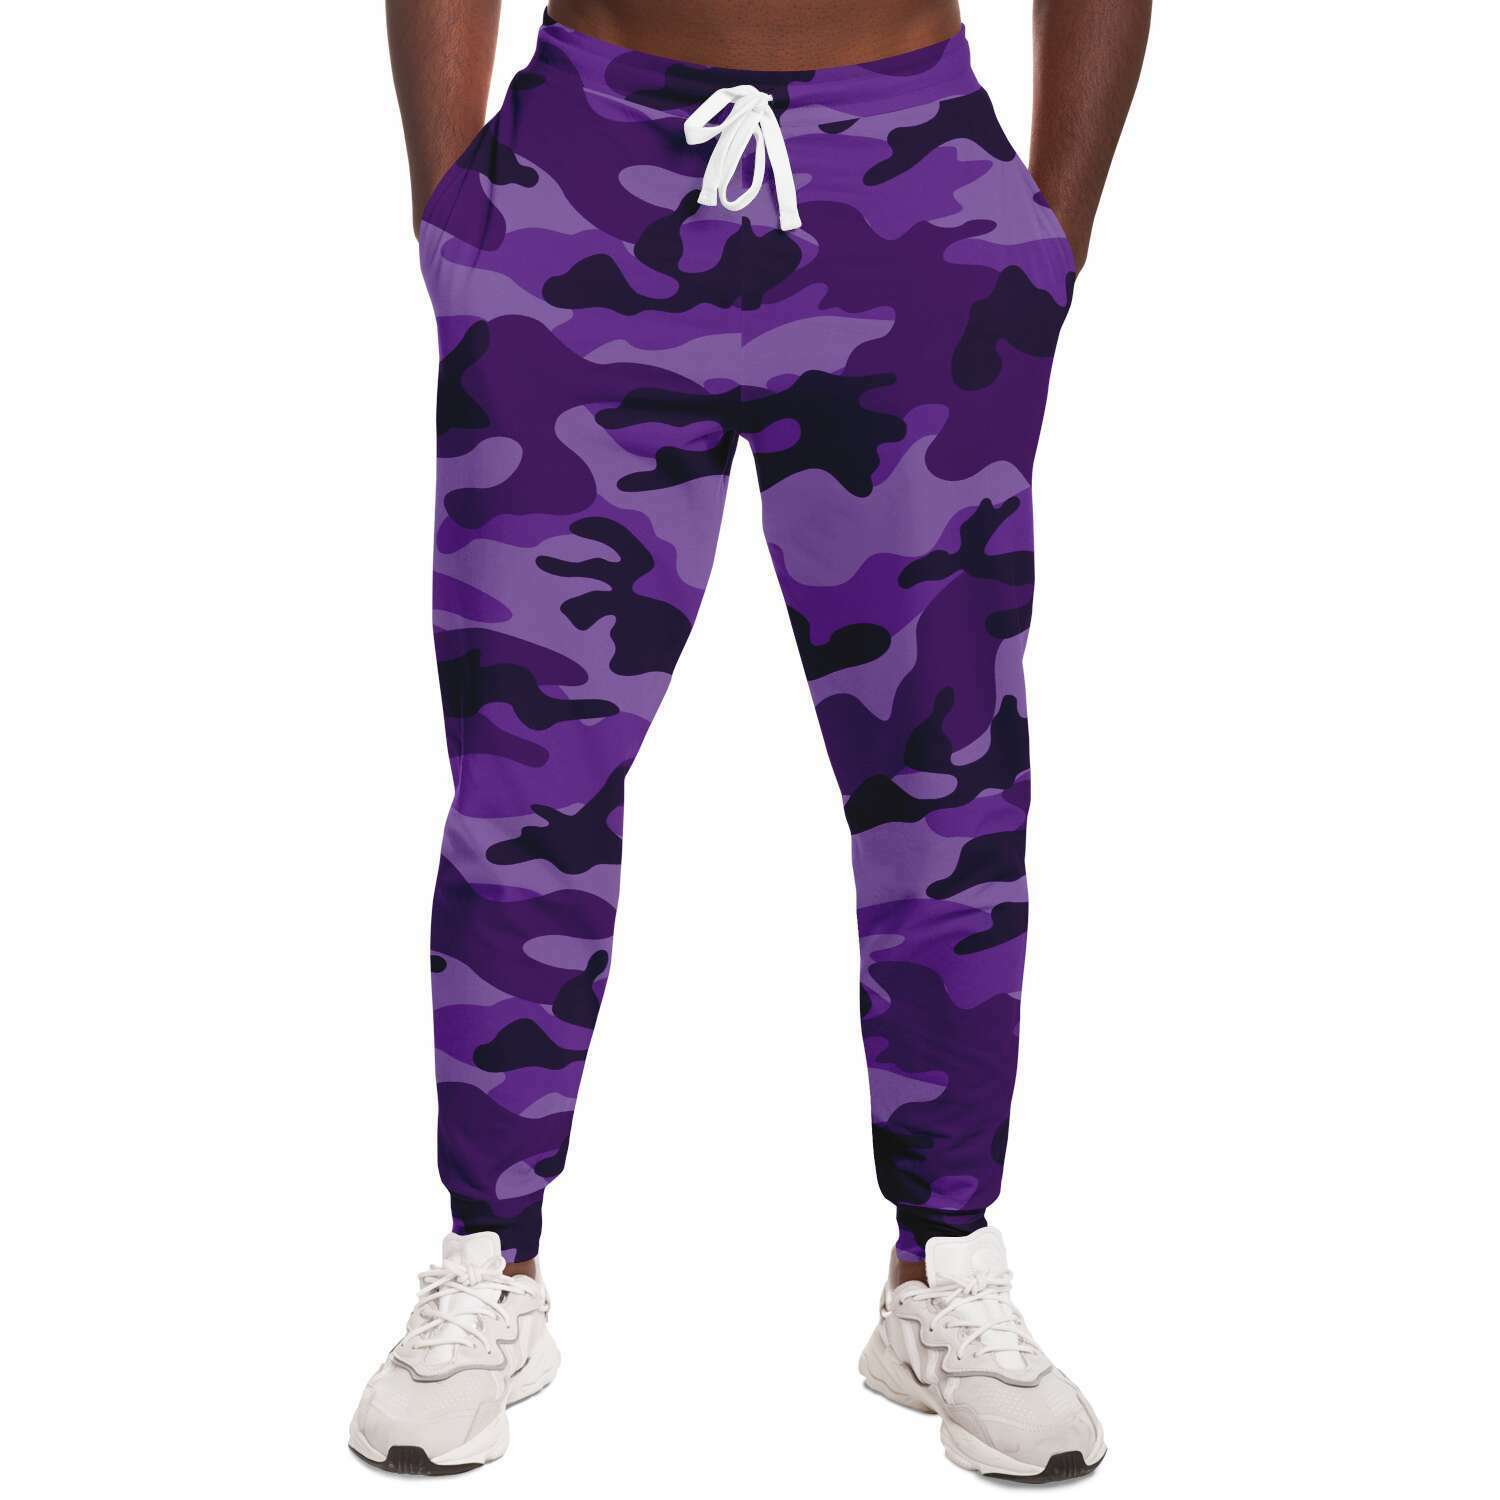 Unisex All Purple Camouflage Athletic Joggers